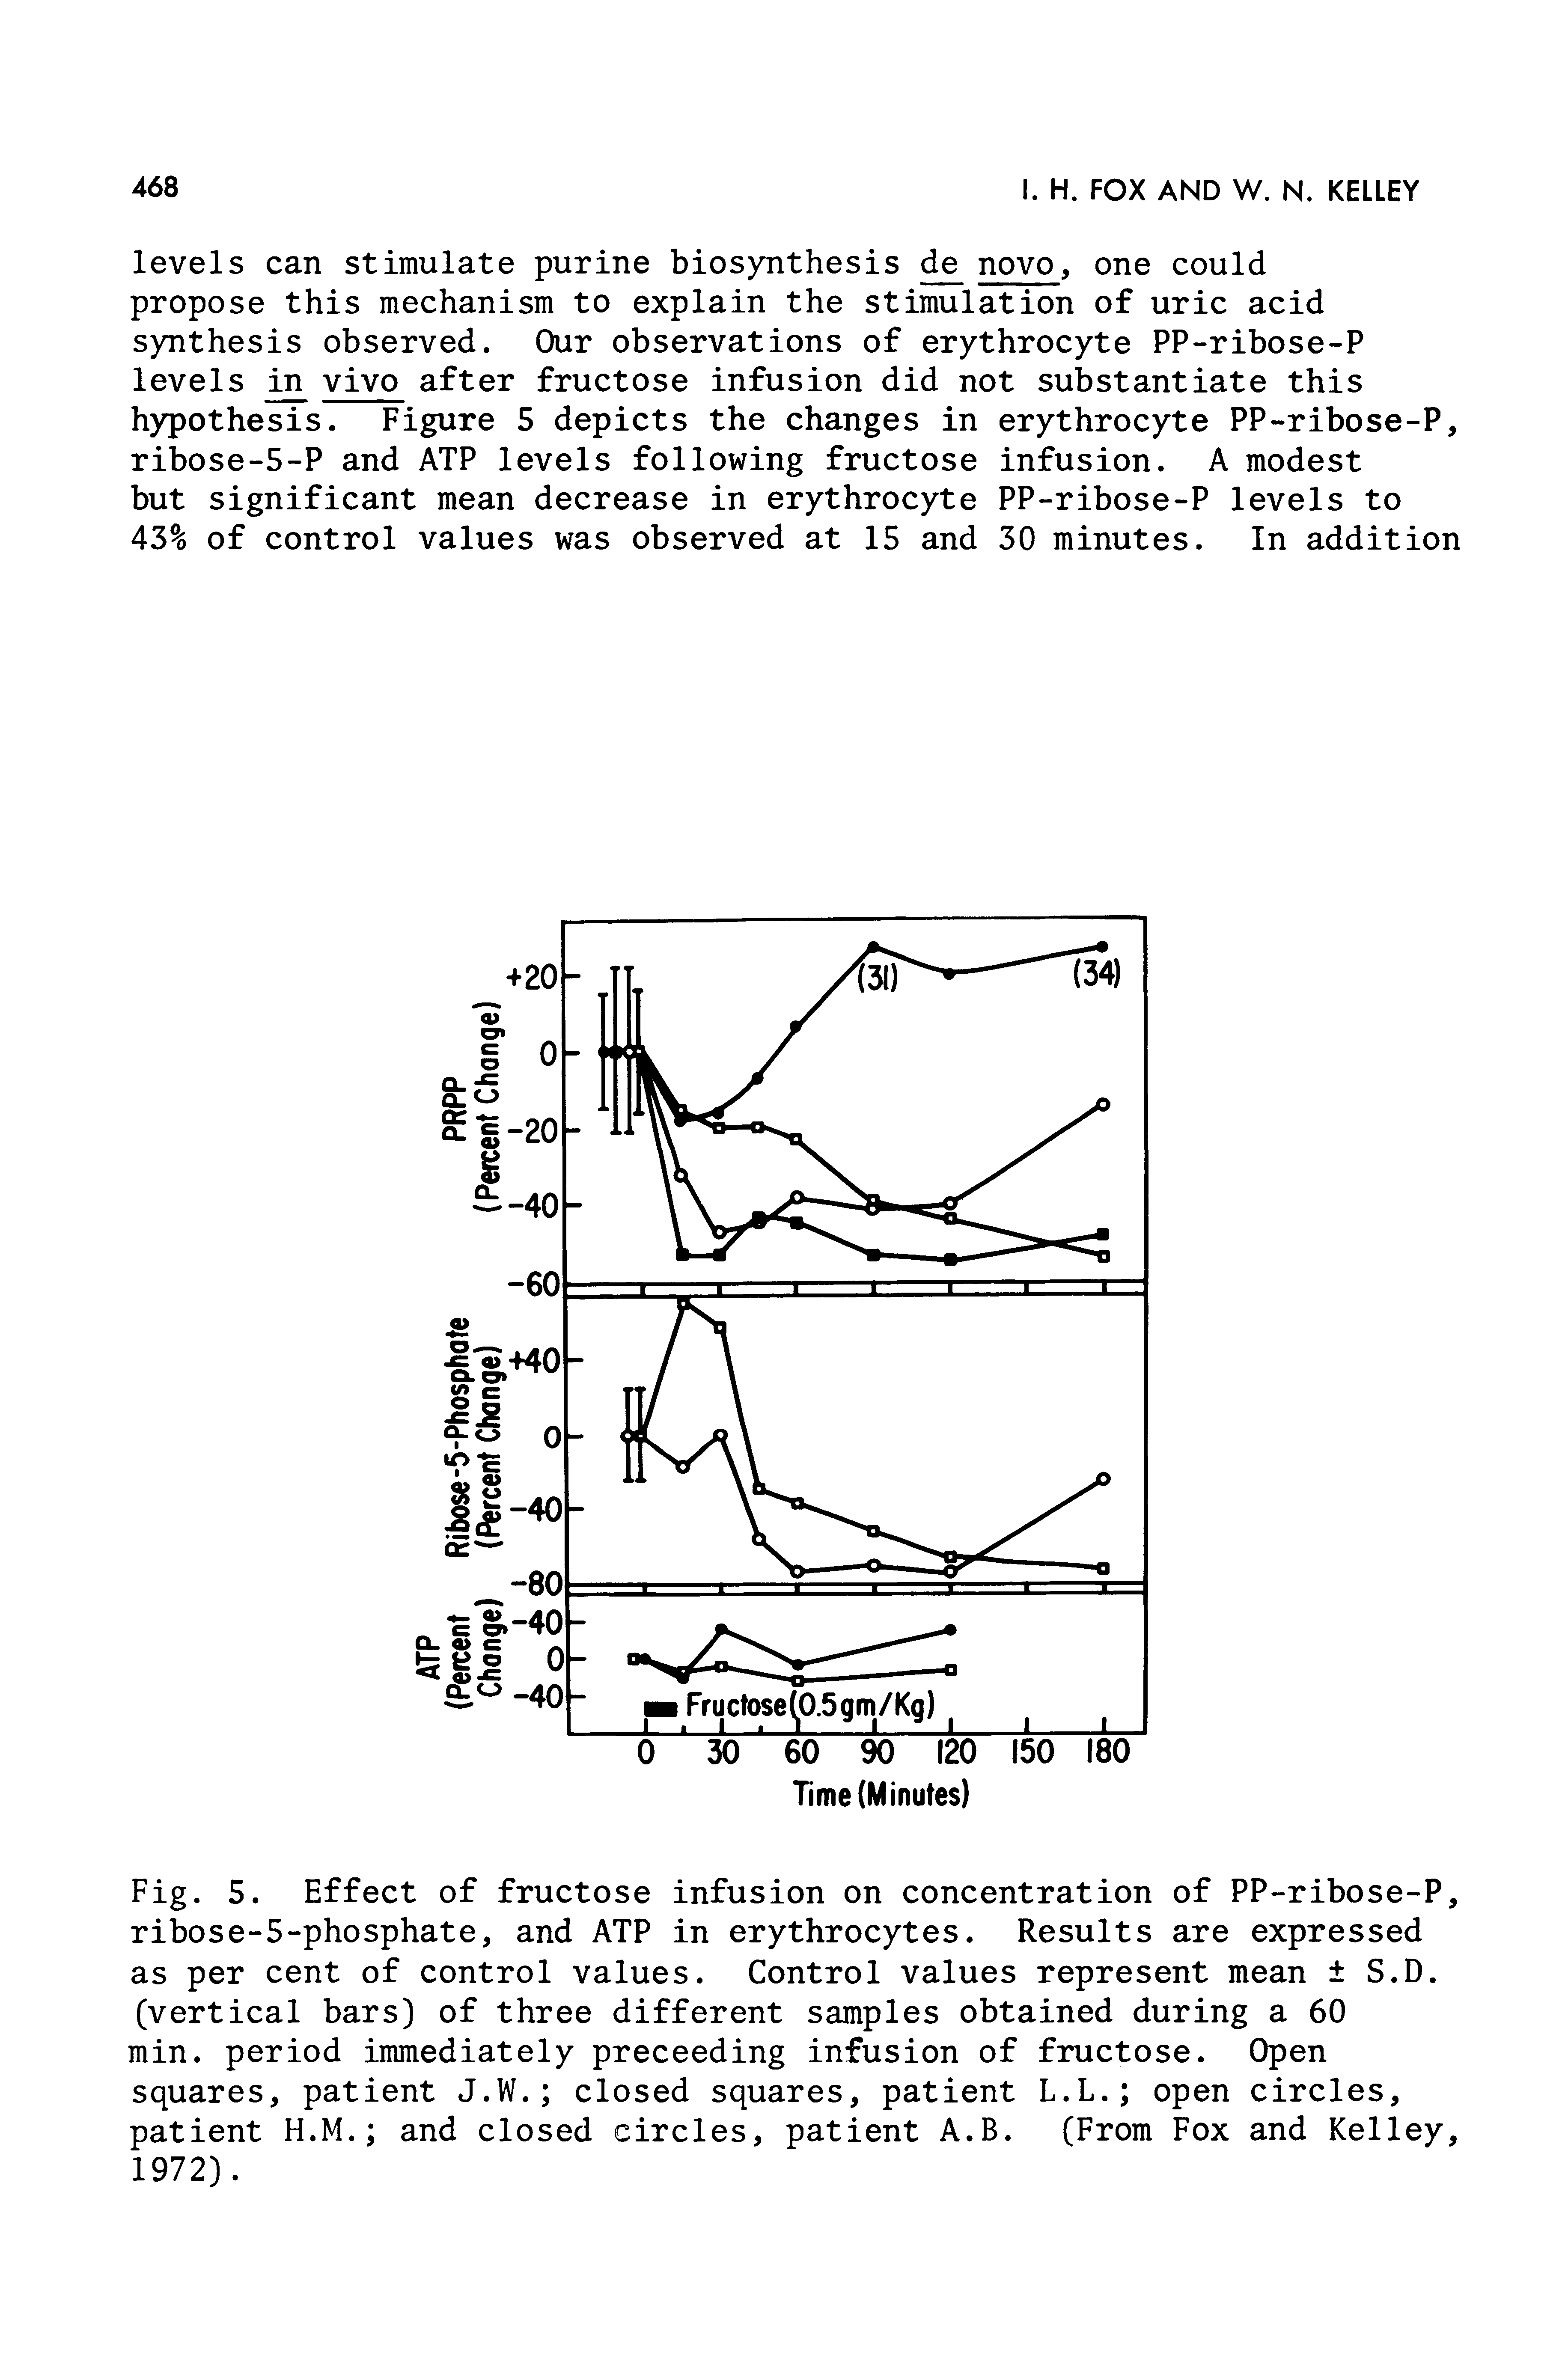 Fig. 5. Effect of fructose infusion on concentration of PP-ribose-P, ribose-5-phosphate, and ATP in erythrocytes. Results are expressed as per cent of control values. Control values represent mean S.D. (vertical bars) of three different samples obtained during a 60 min. period immediately preceeding infusion of fructose. Open squares, patient J.W. closed squares, patient L.L. open circles, patient H.M. and closed circles, patient A.B. (From Fox and Kelley, 1972).